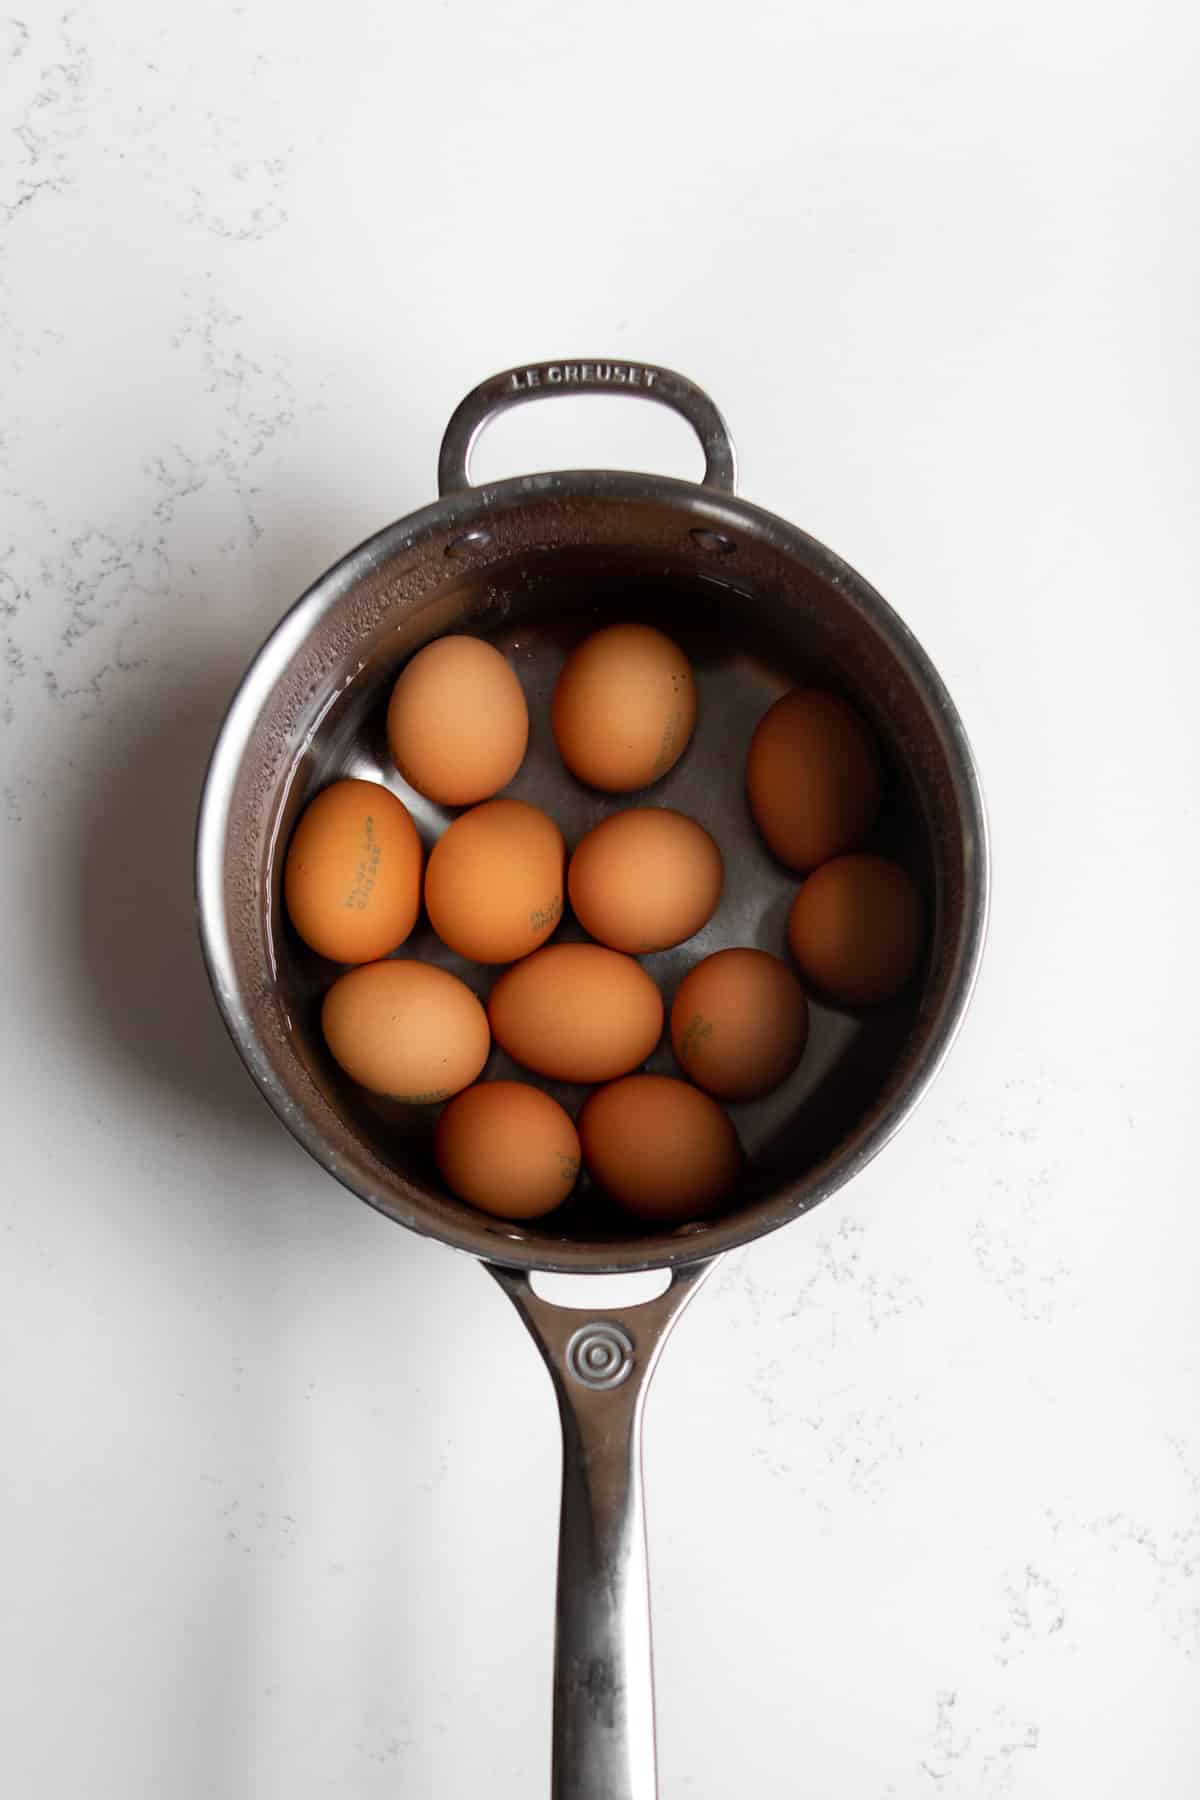 A dozen eggs in a stainless steel pot submerged in water.